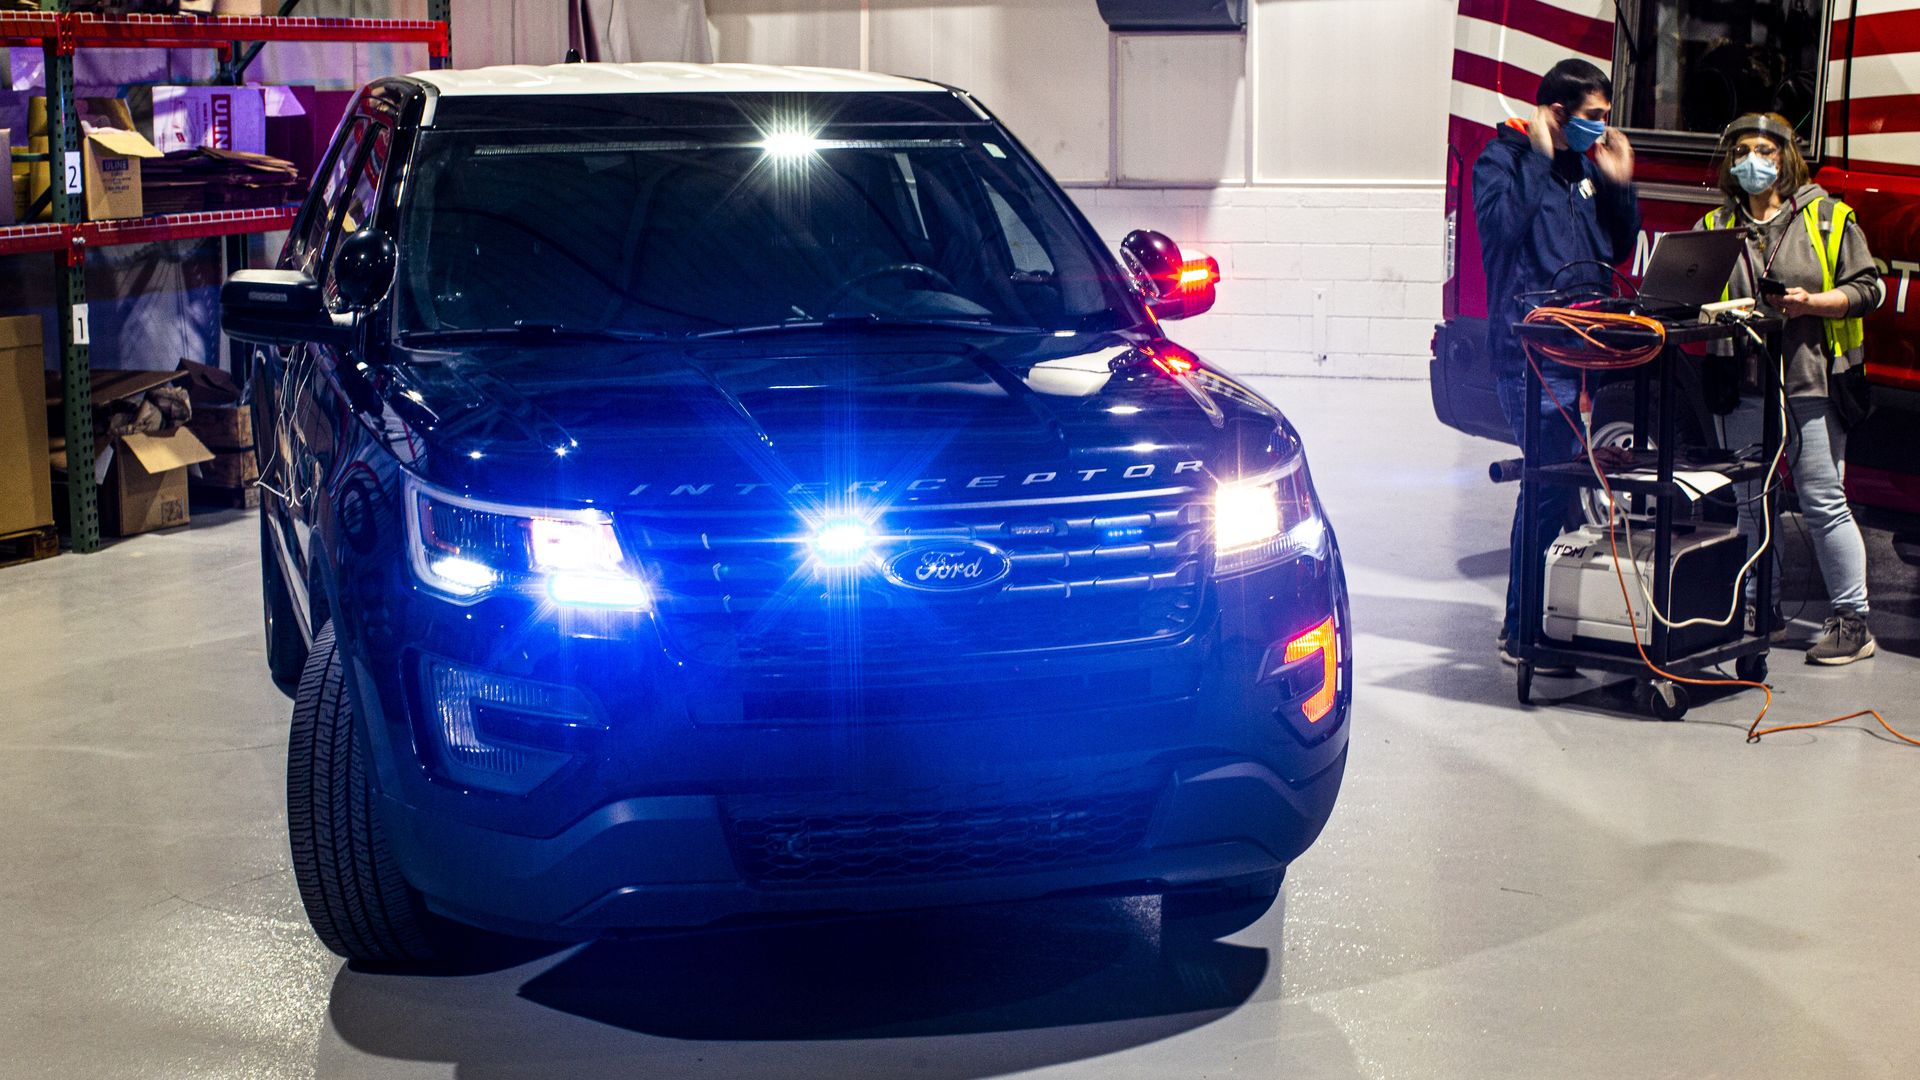 Image of Ford's self-cleaning police car with lights flashing to monitor progress.